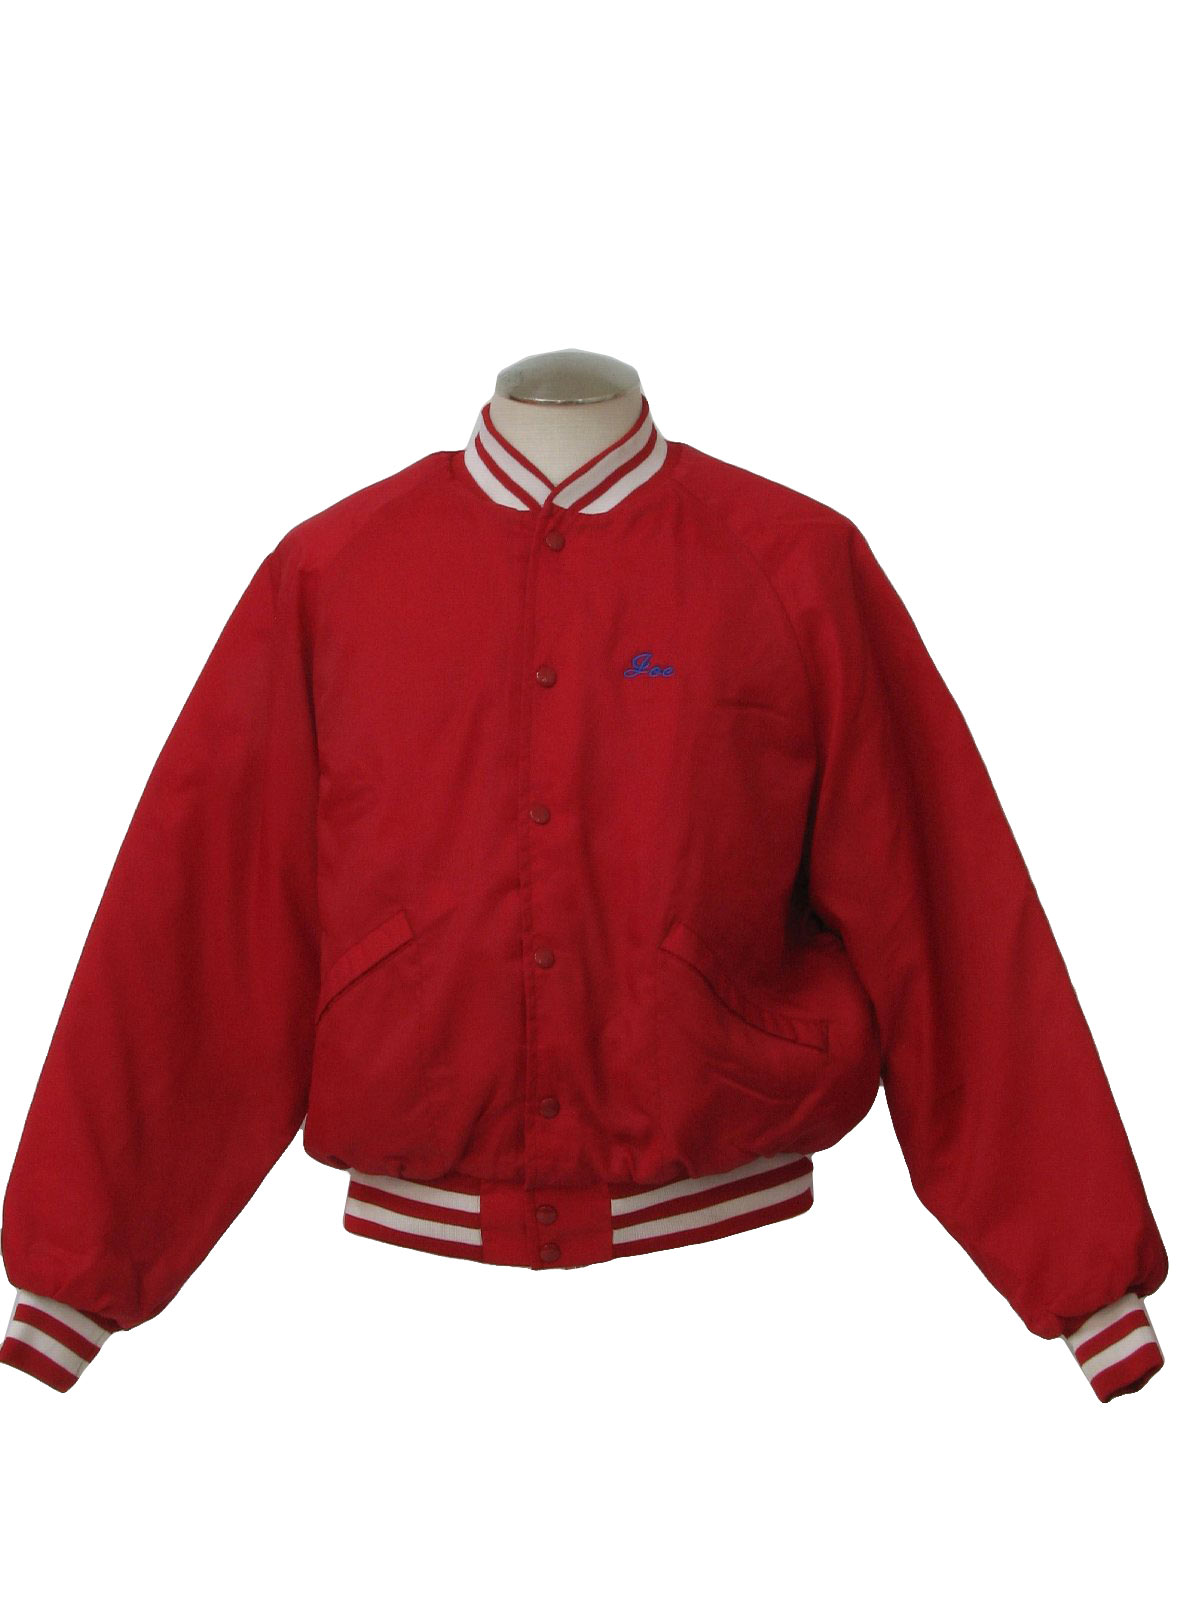 1990s King Louie Jacket: 90s -King Louie- Mens red and white nylon with ...